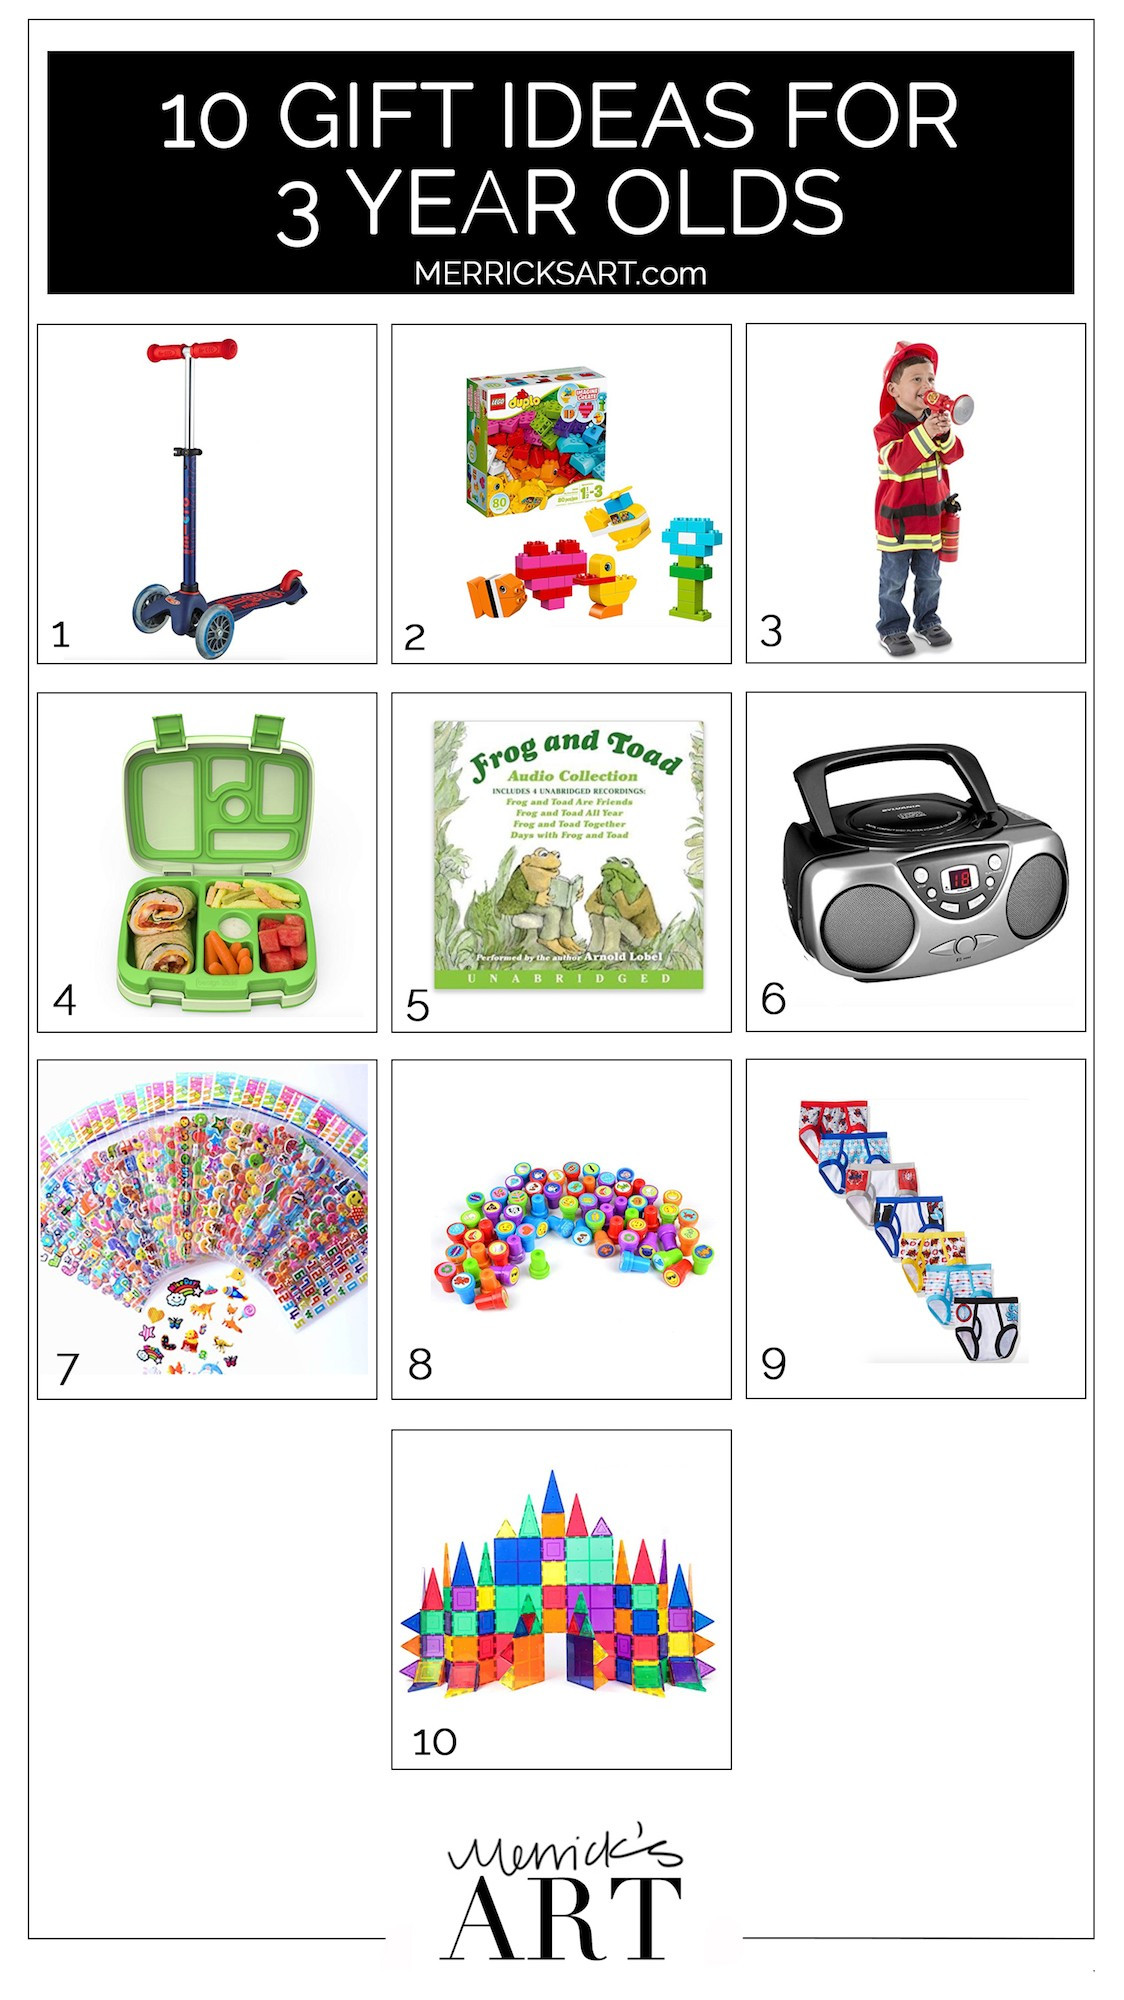 Great Gift Ideas For 3 Year Old Boys
 10 Birthday Gift Ideas for a 3 Year Old Boy